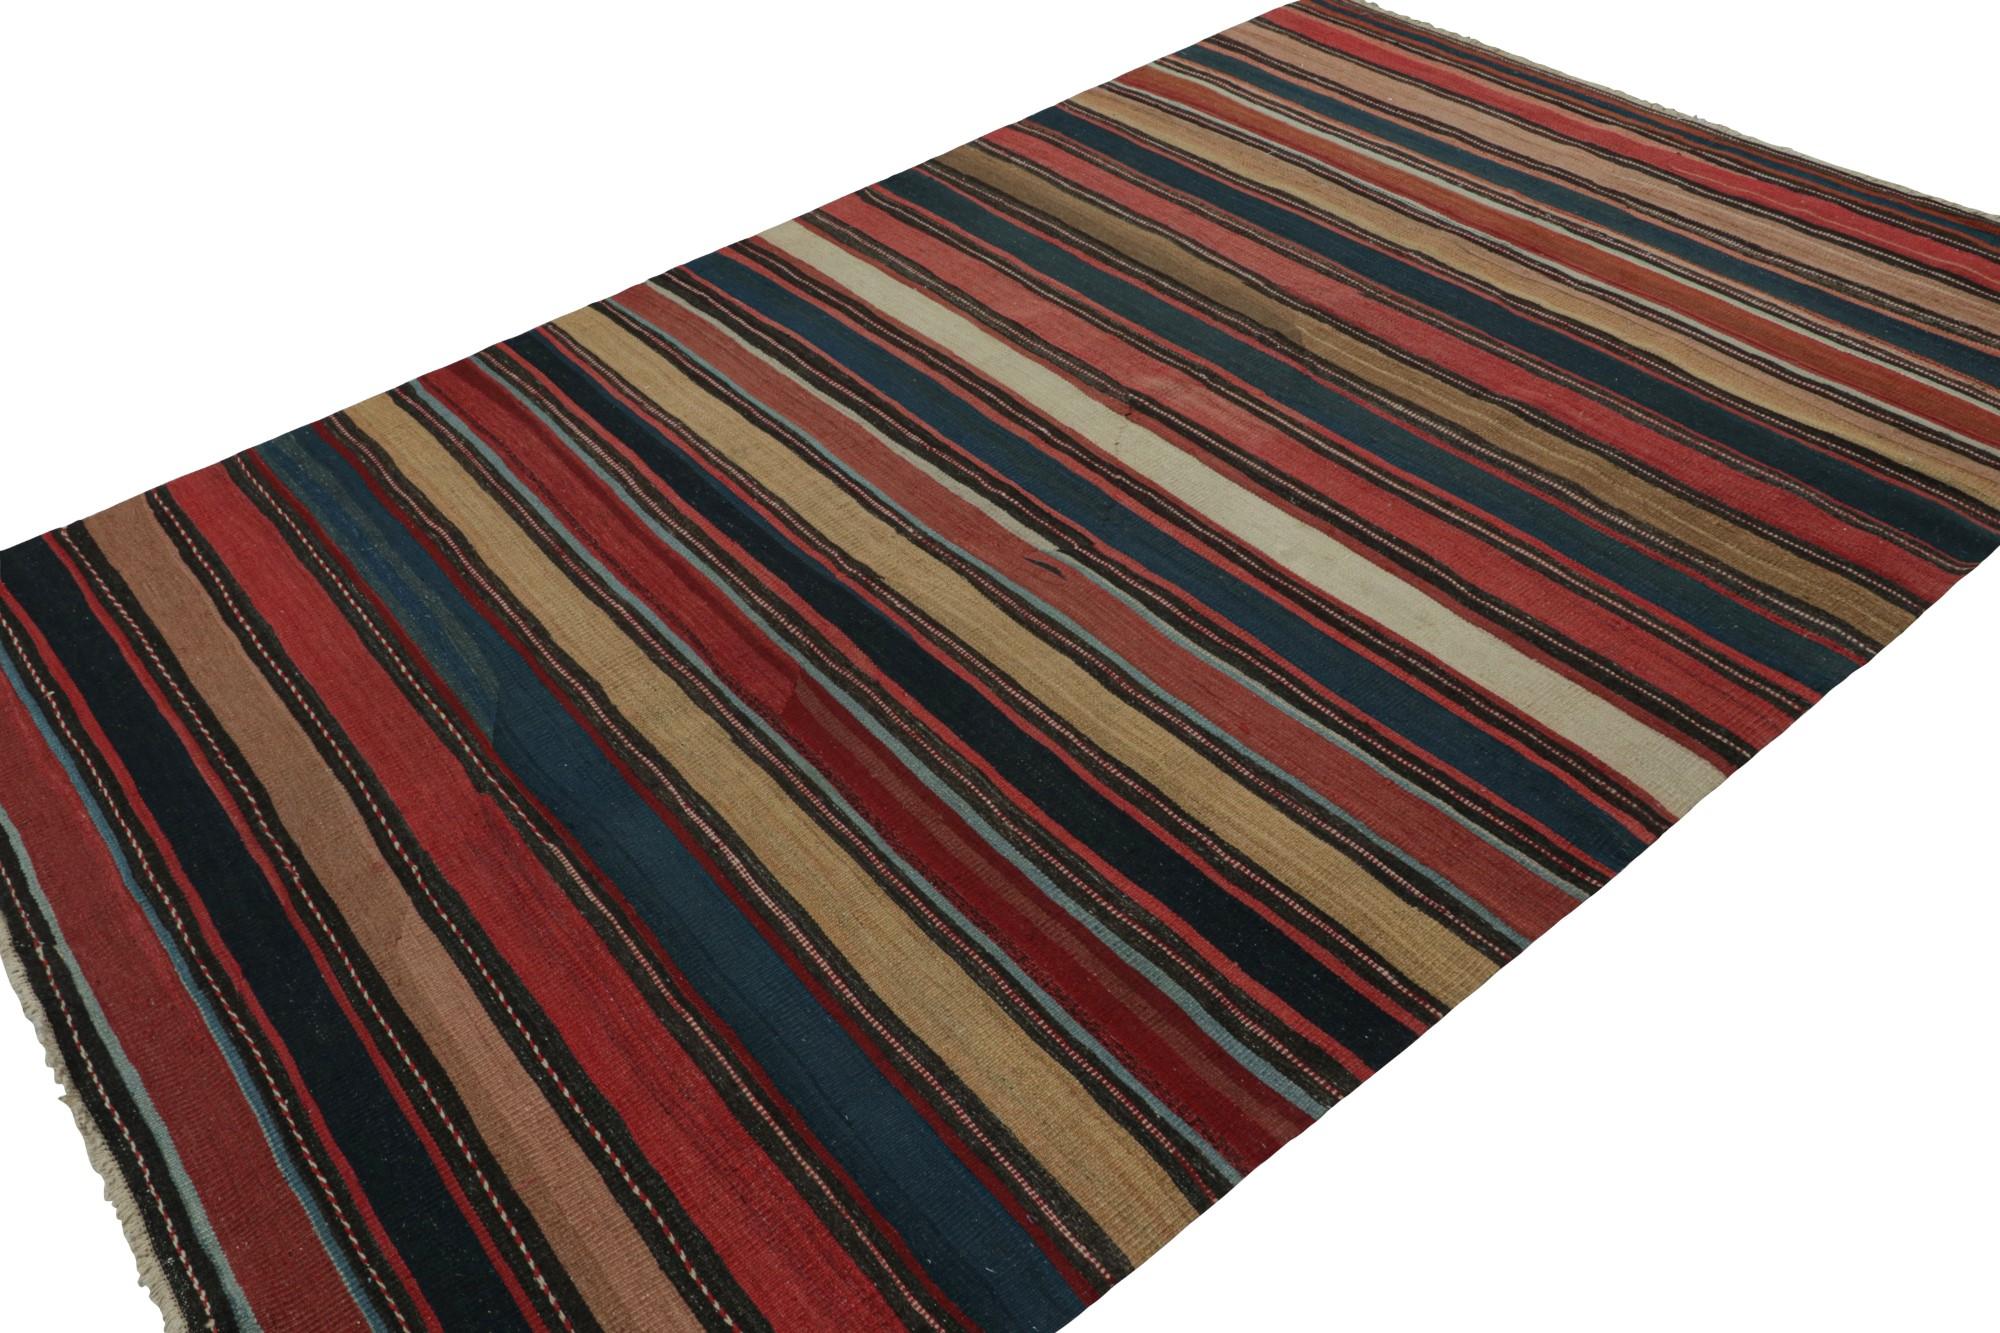 Hand knotted in wool, this 6x10 Afghan tribal kilim rug is an extraordinarily simple piece with colorful stripes and a simple presence. 

On the Design: 

The minimalist design prefers geometric stripes in rich beige/brown, blue and red with gray